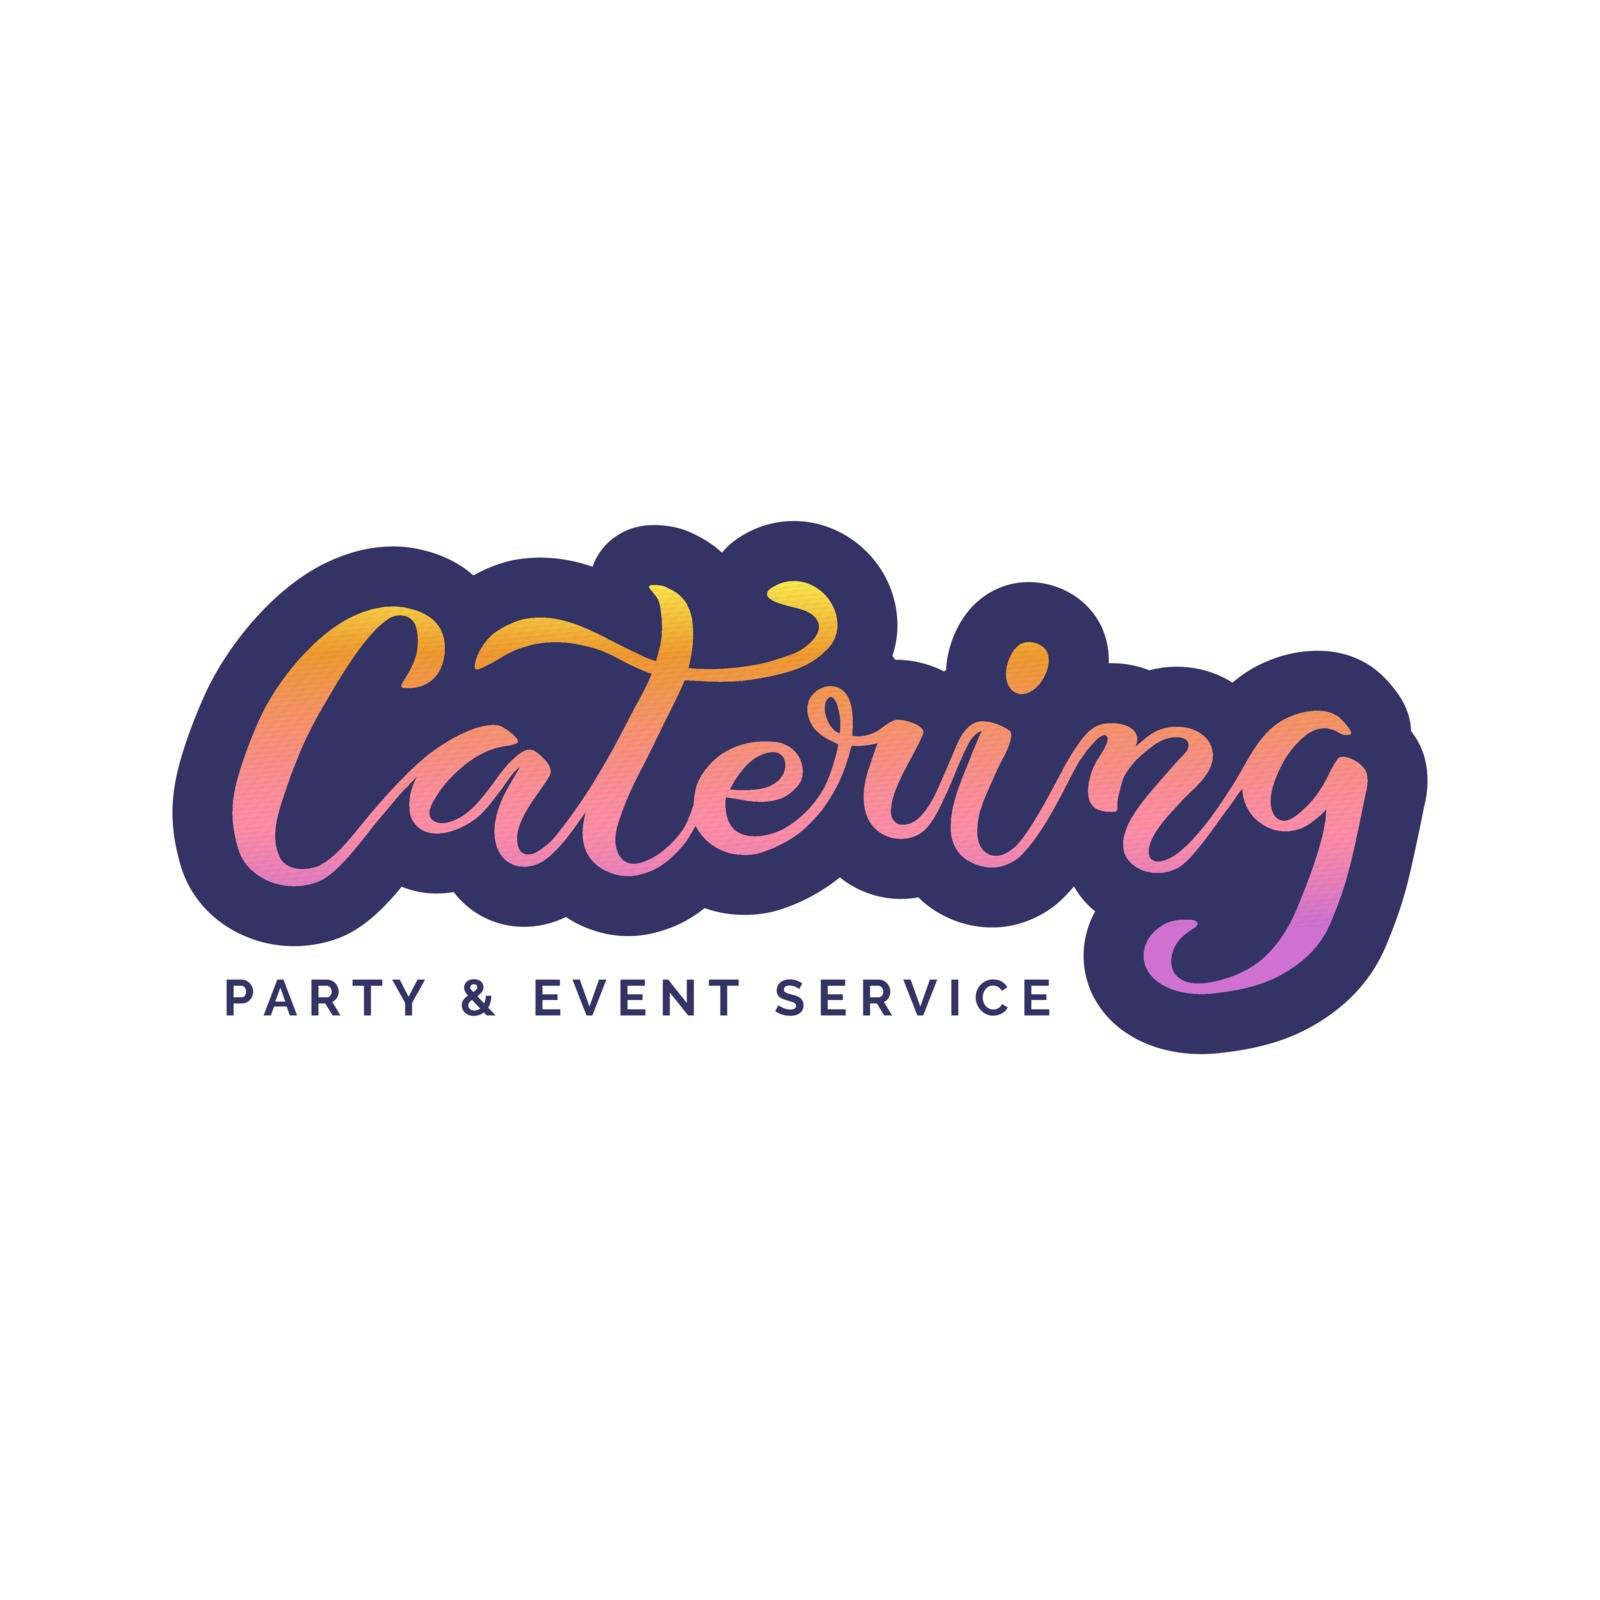 Template of catering company logo by LanaLeta